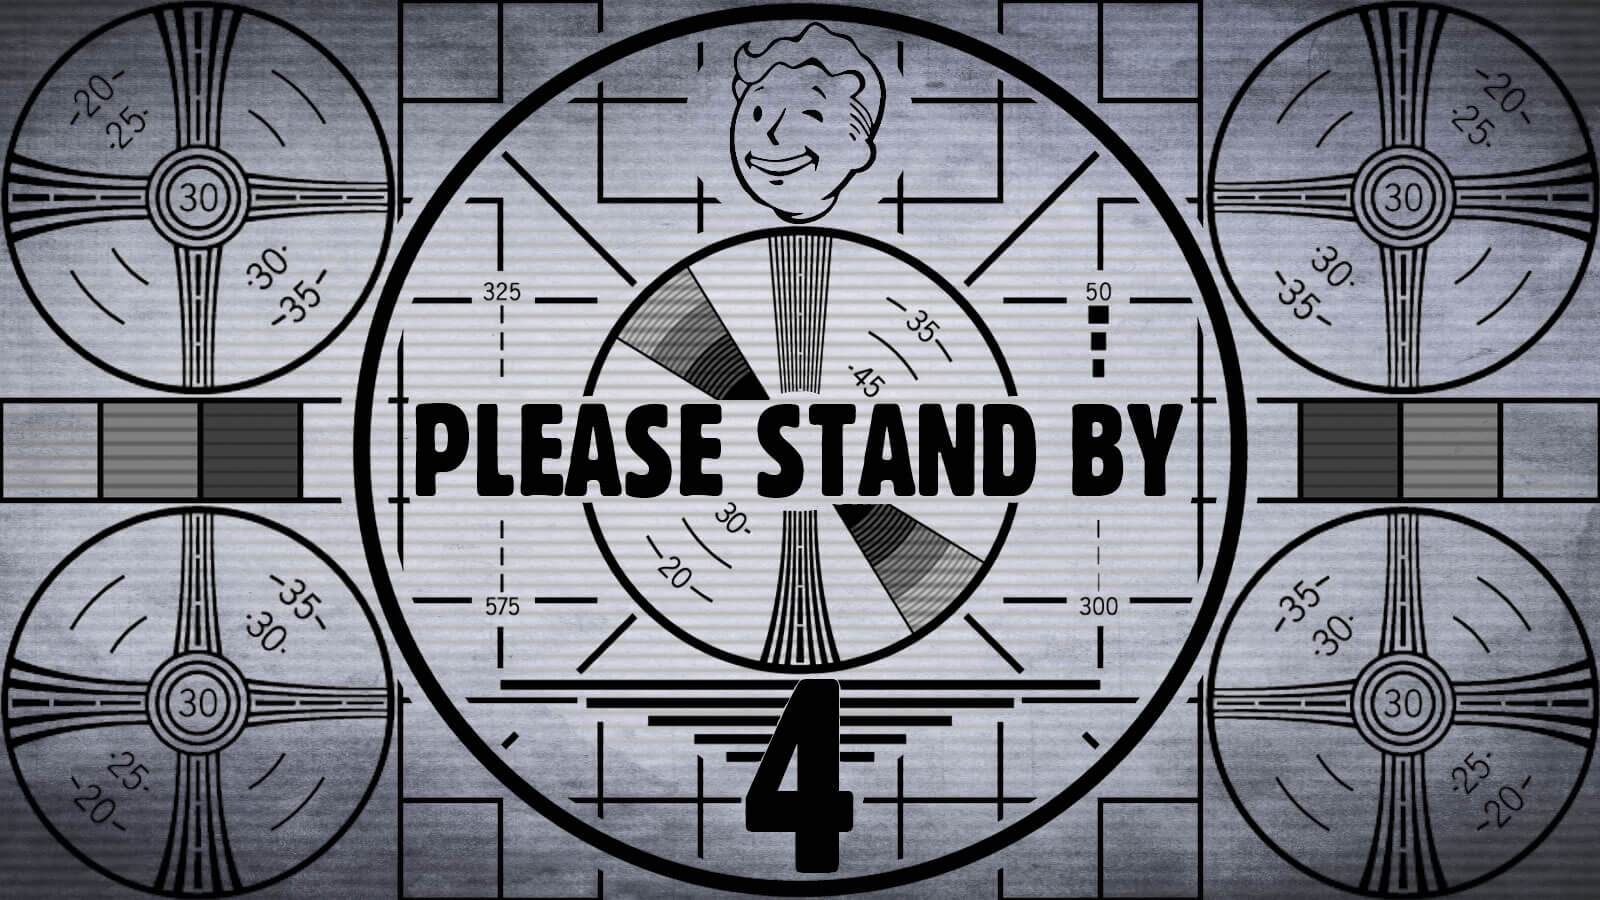 Bethesda trolled over 2 million Fallout fans with a 24-hour stream of nothing